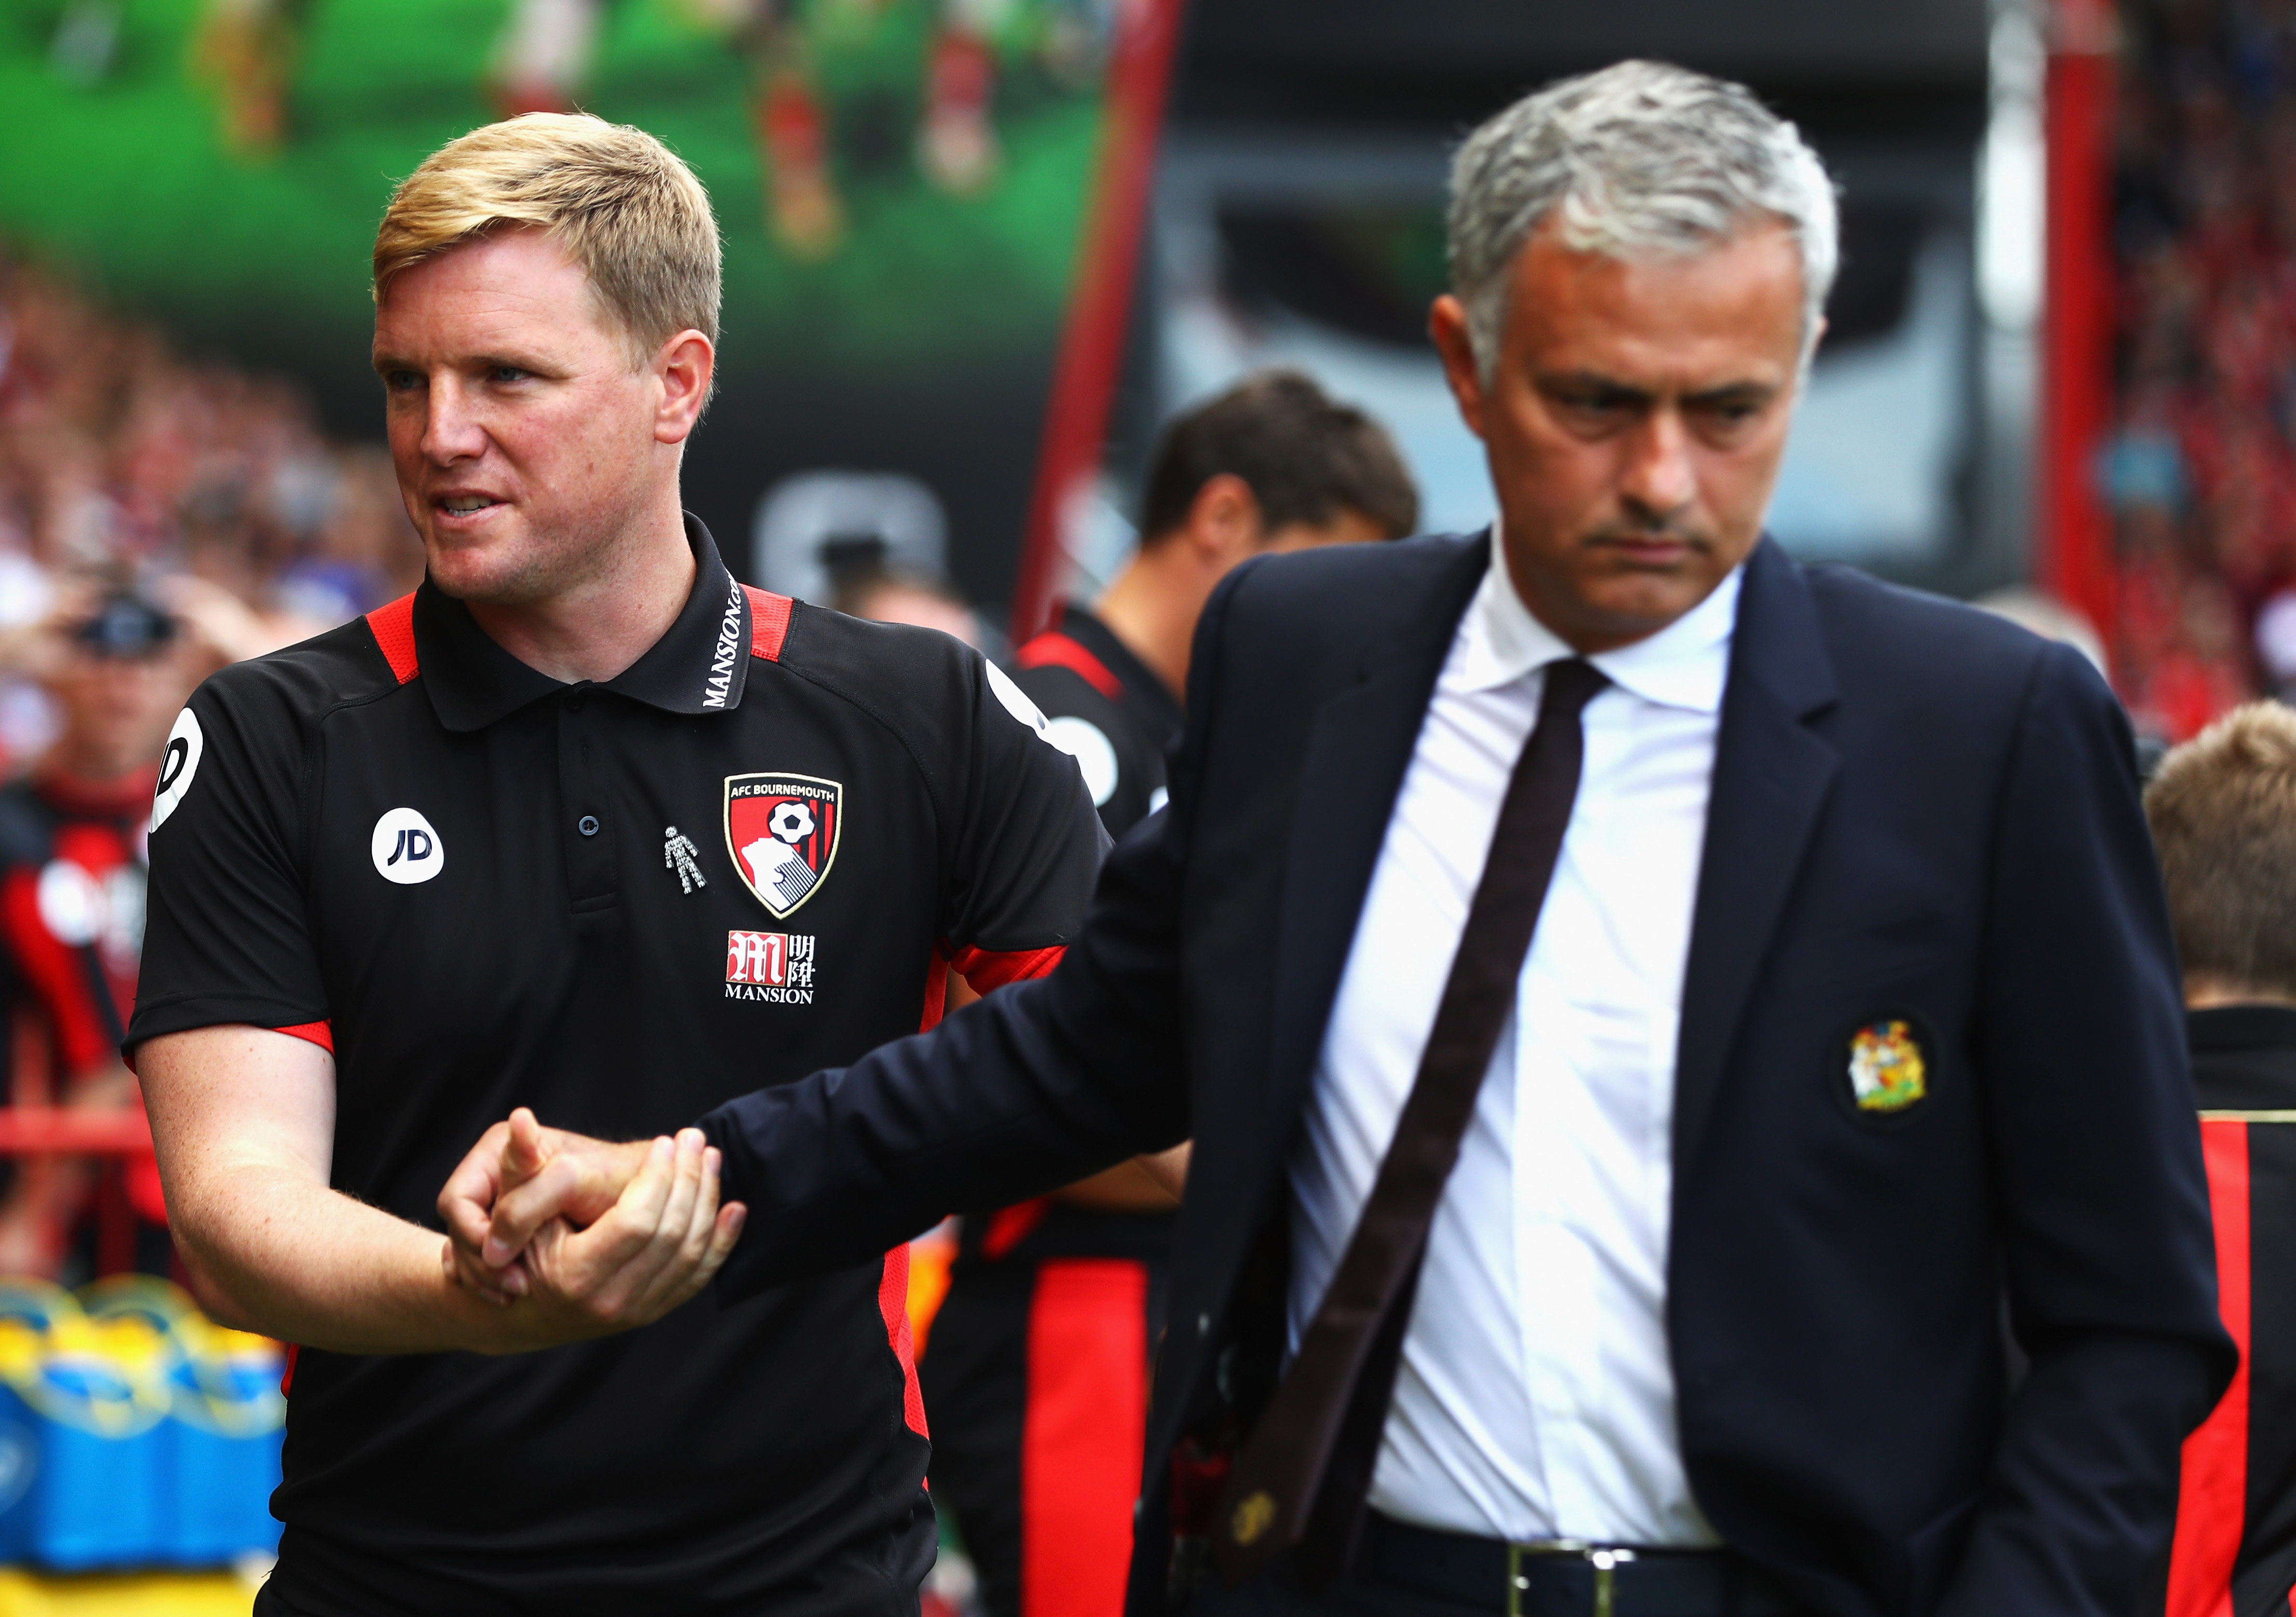 BOURNEMOUTH, ENGLAND - AUGUST 14: Eddie Howe, Manager of AFC Bournemouth greets manager of Manchester United, Jose Mourinho during the Premier League match between AFC Bournemouth and Manchester United at Vitality Stadium on August 14, 2016 in Bournemouth, England.  (Photo by Michael Steele/Getty Images)